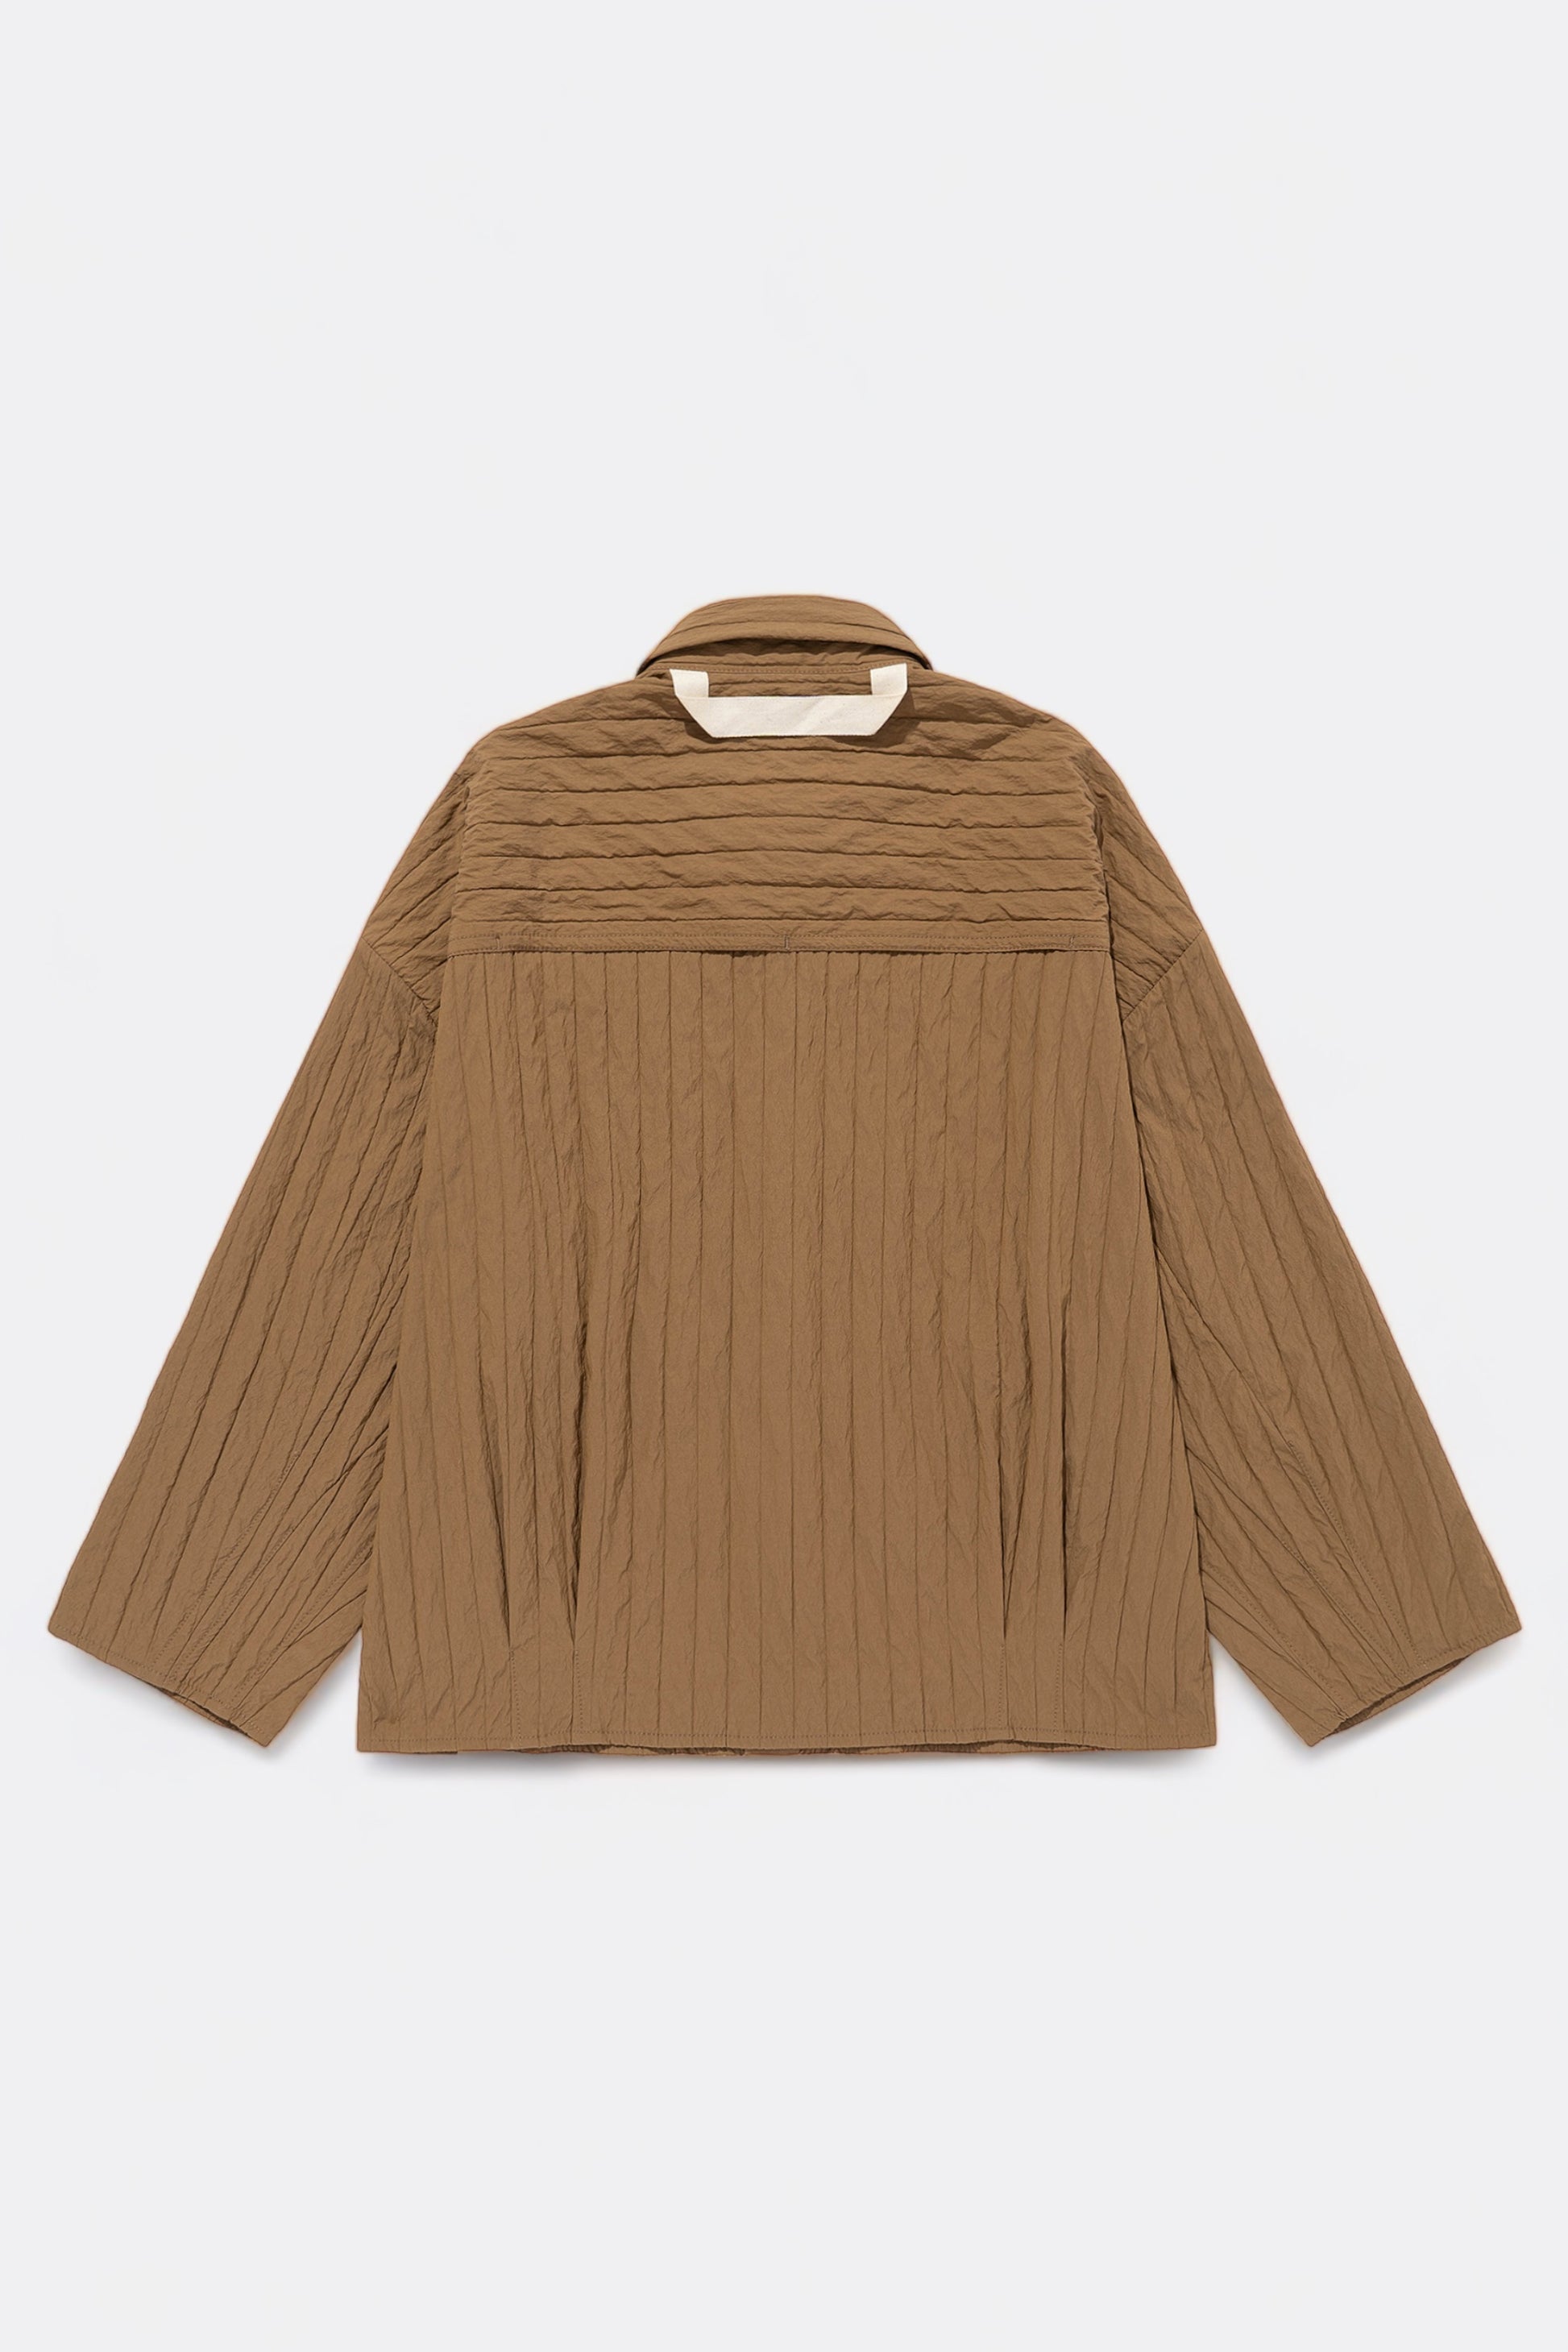 Merely Made - Merely Quilted Cropped Shirt (Sage Brown)